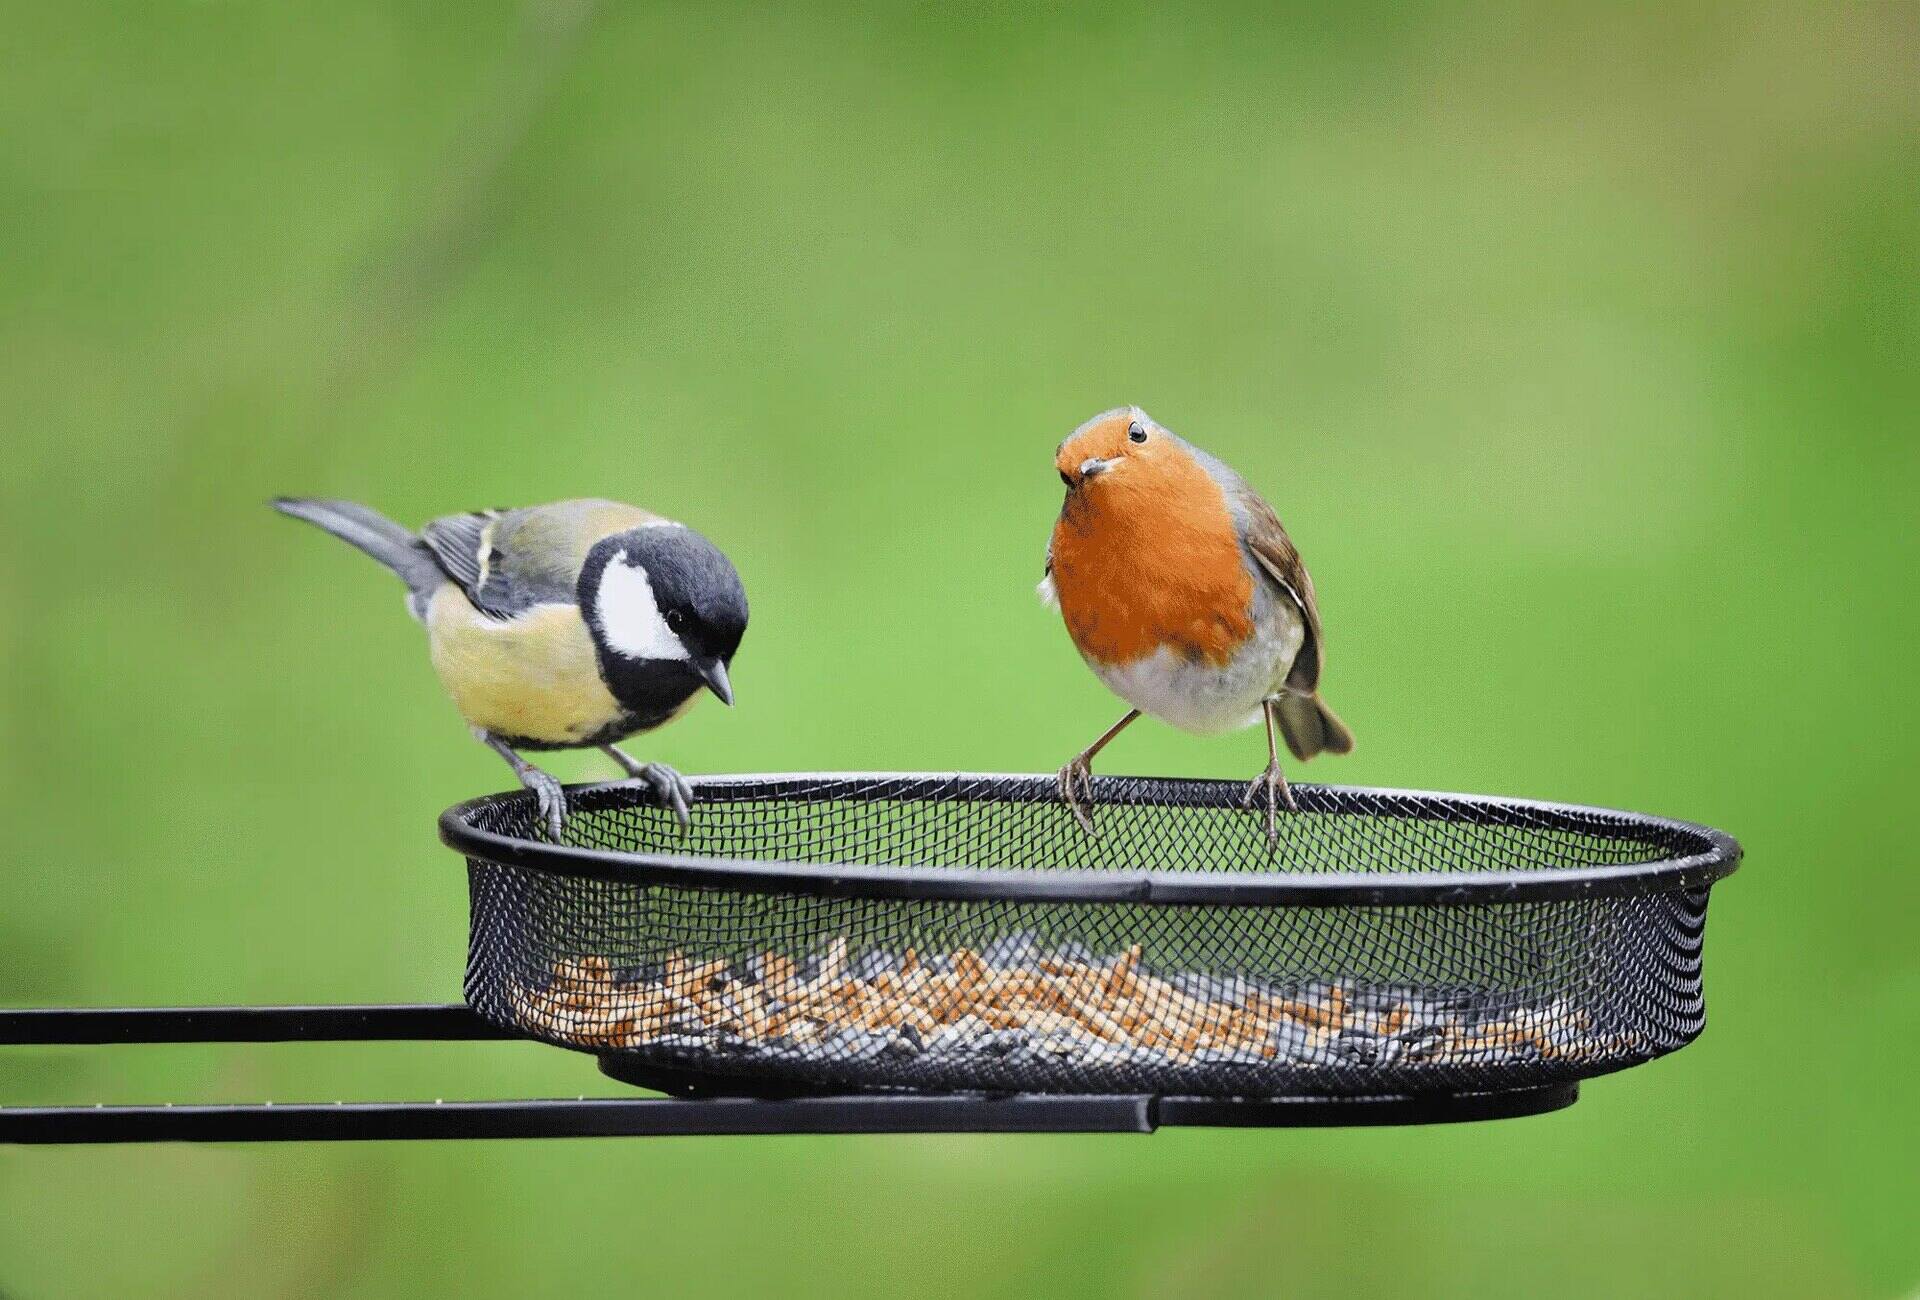 How To Keep Bird Seed Off The Ground